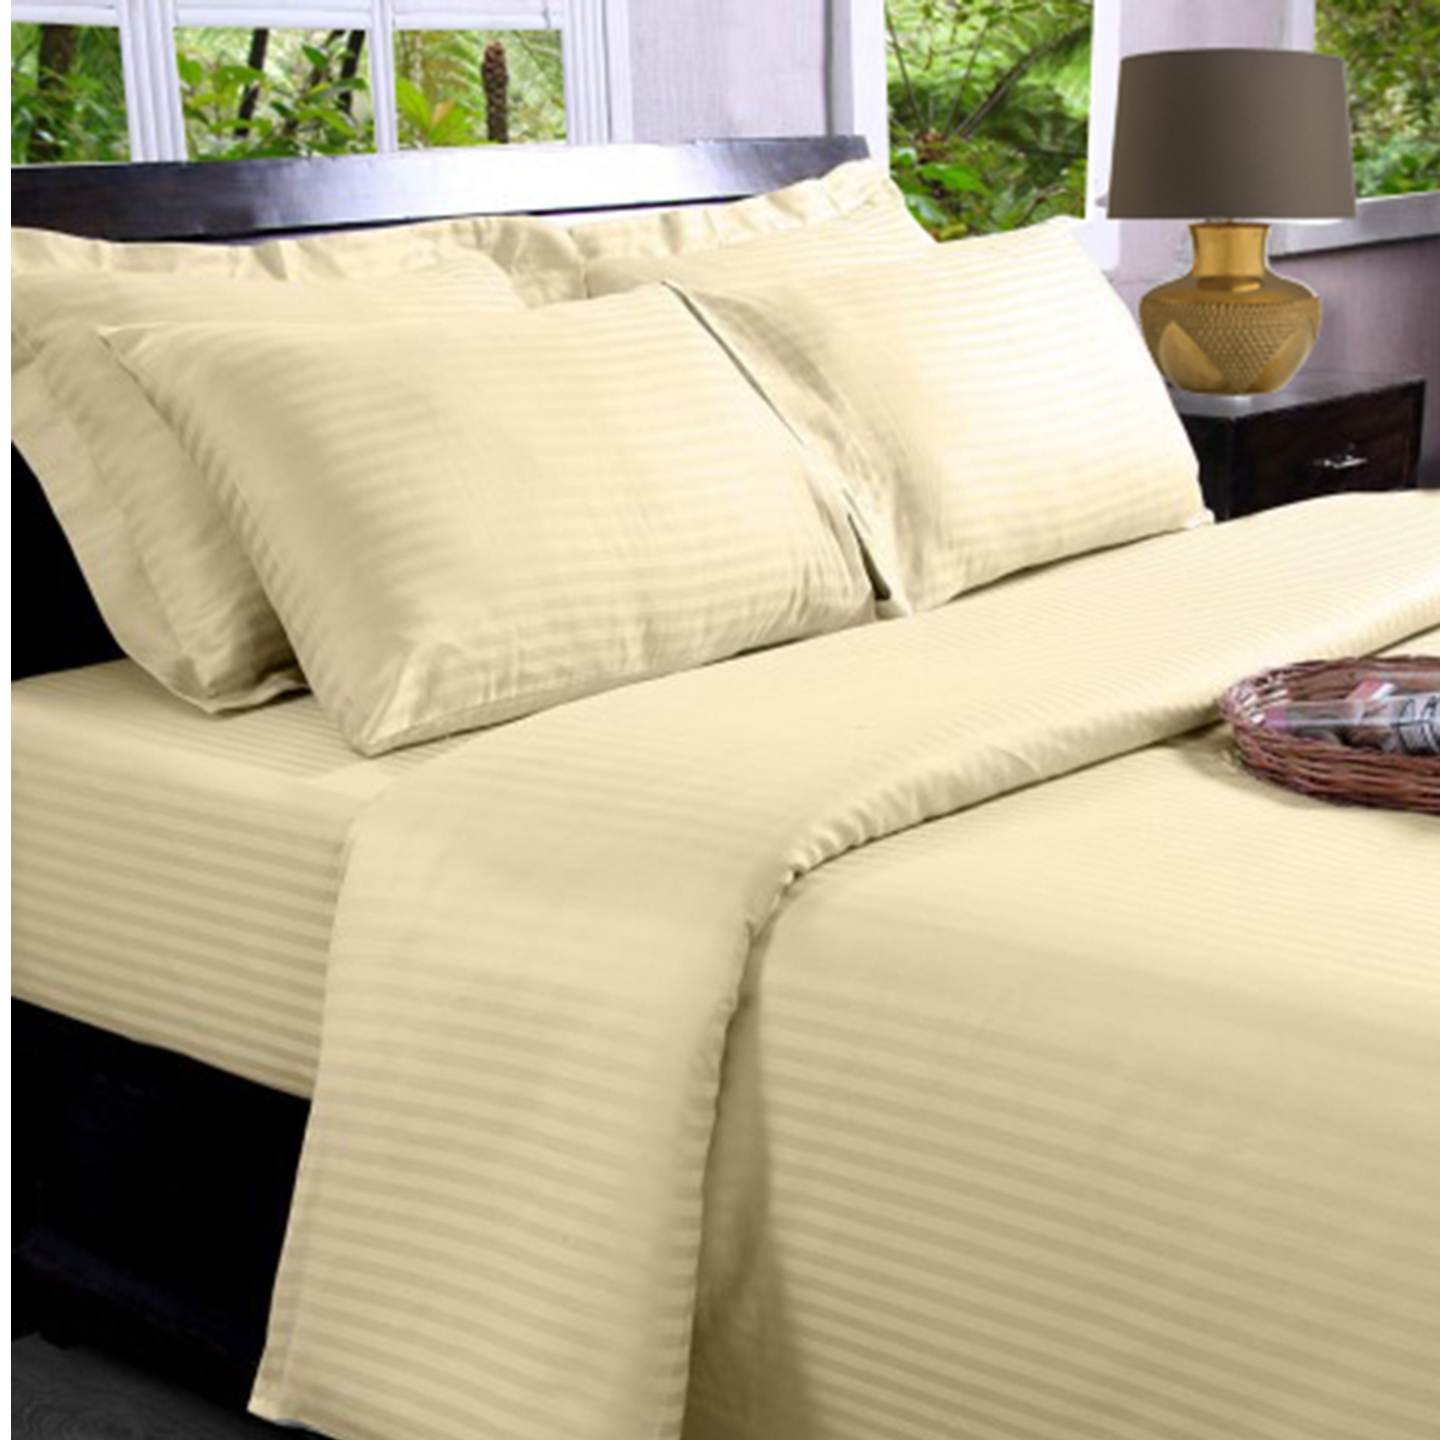 Pastel Butter Yellow - 100% Cotton -  Premium Sateen 330 Thread Count Bed Sheet Set - King Size